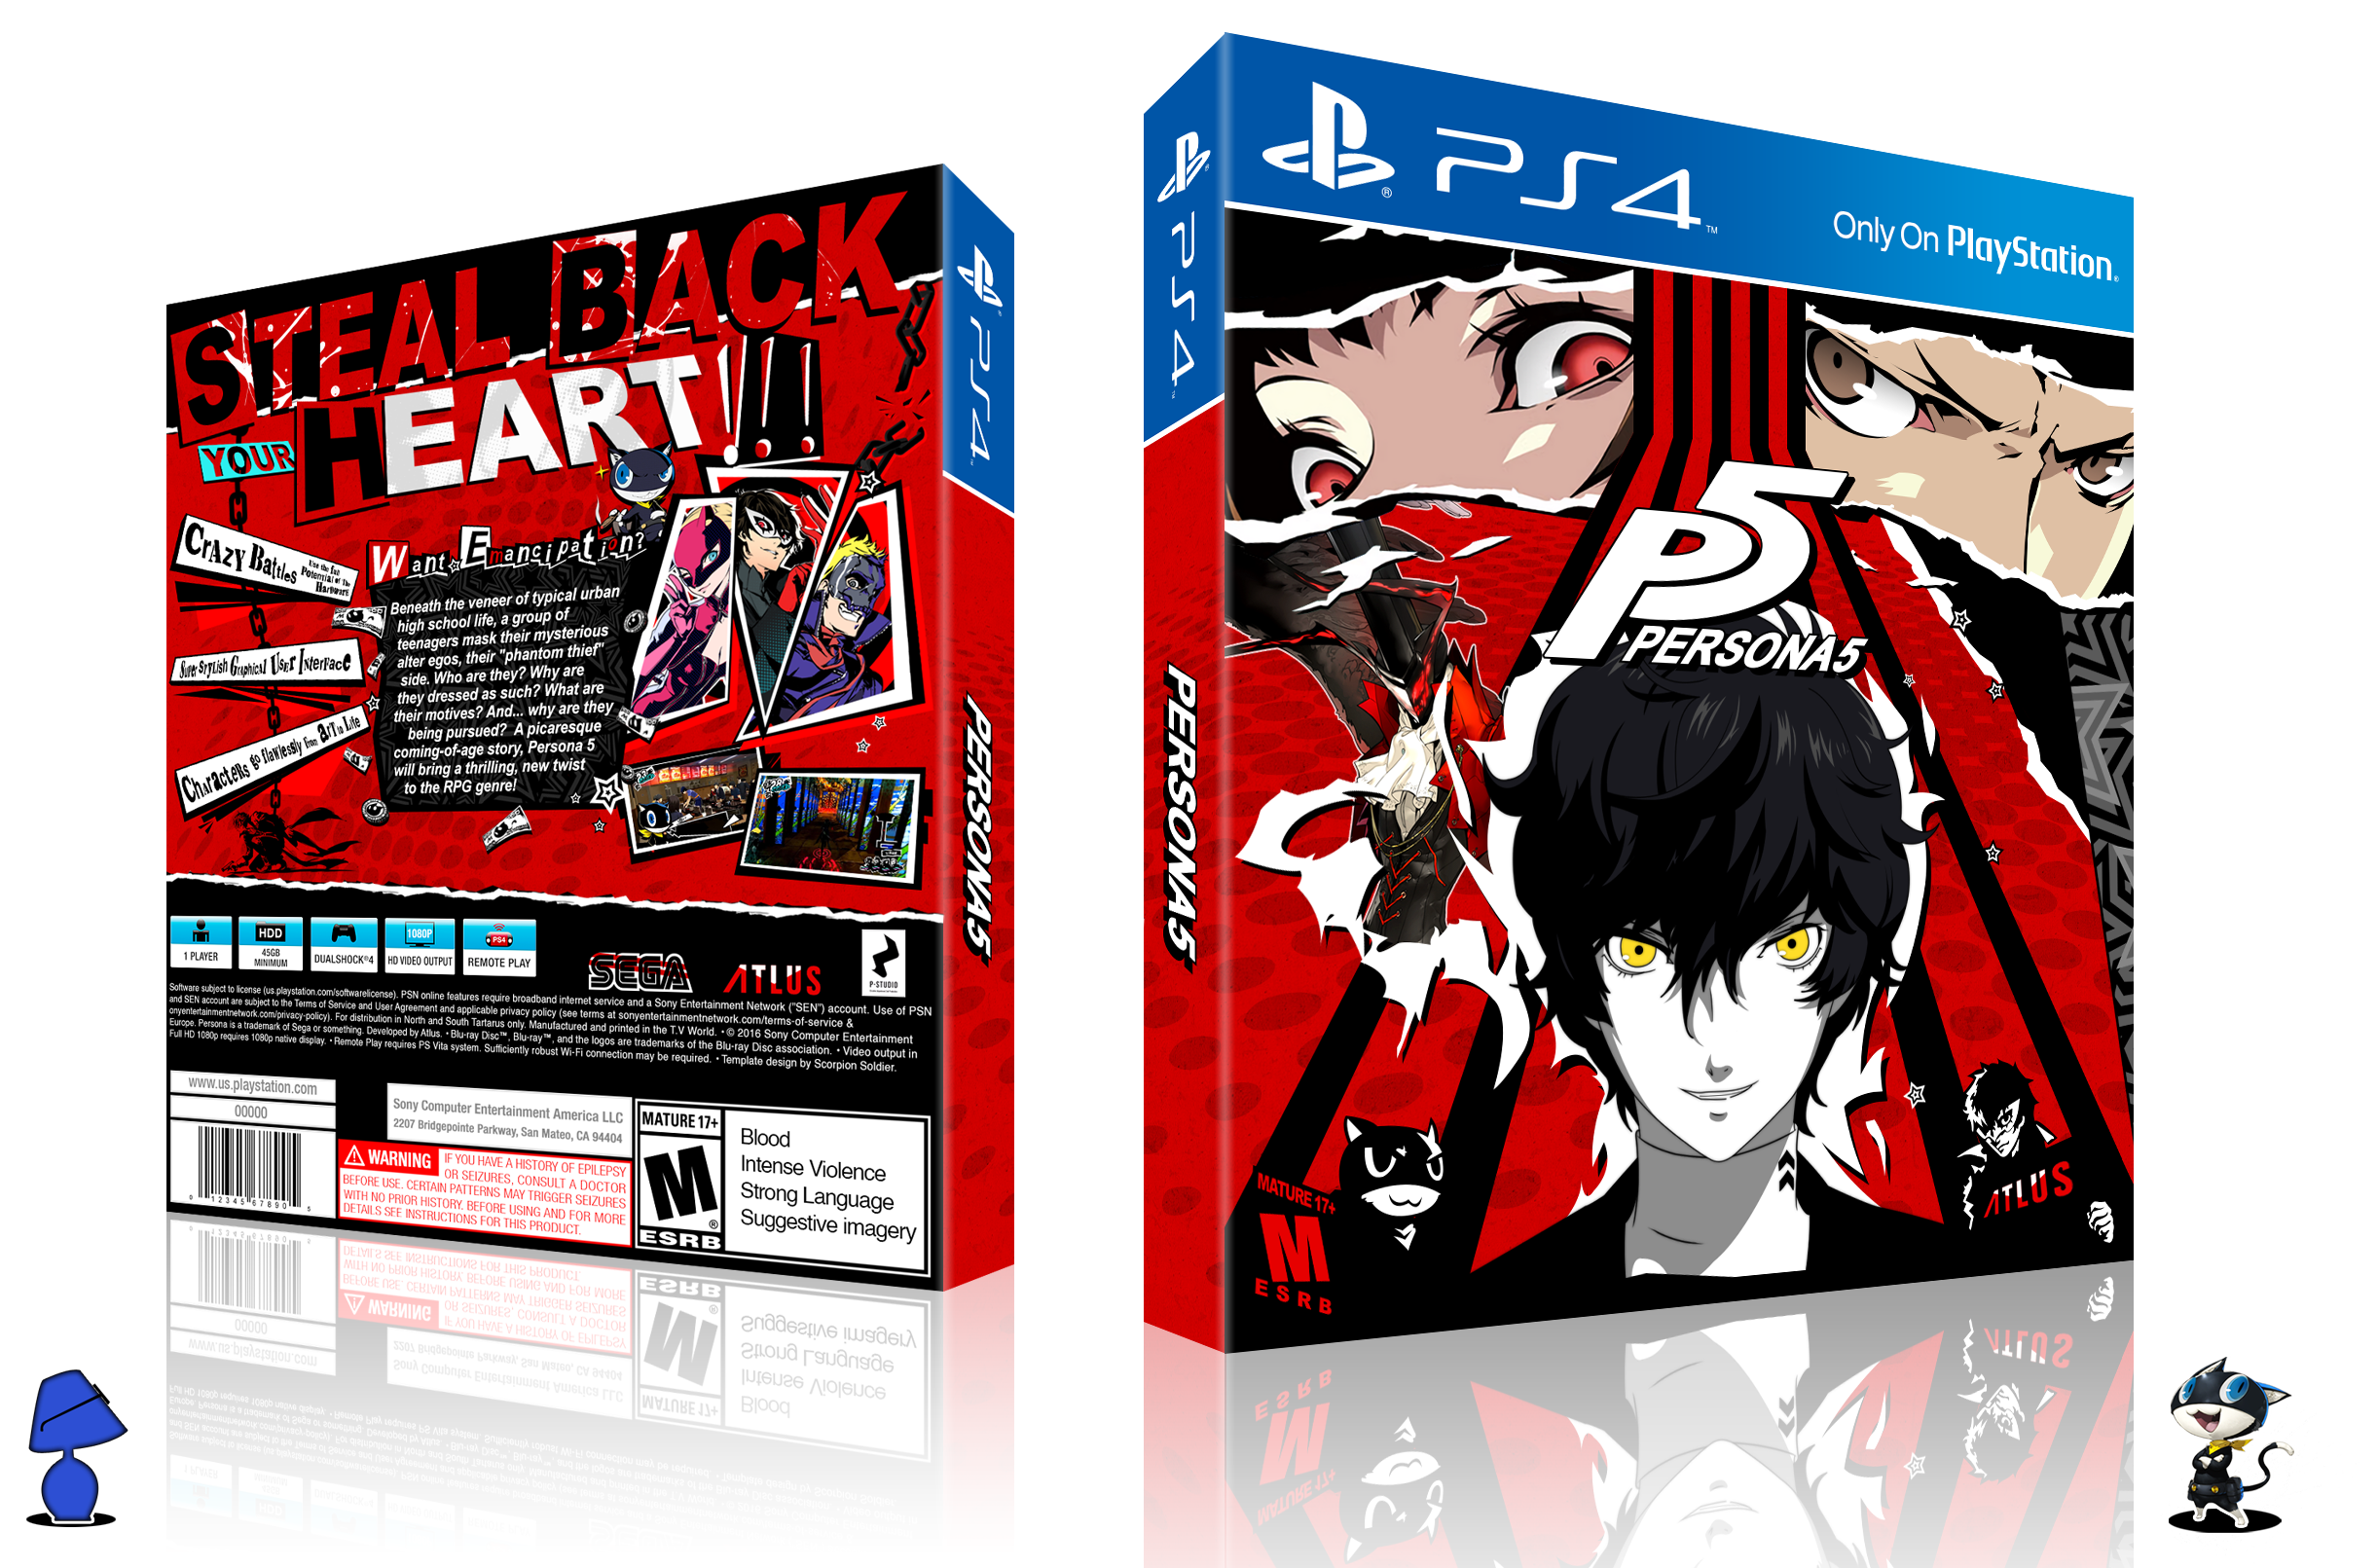 Viewing full size Persona 5 box cover.